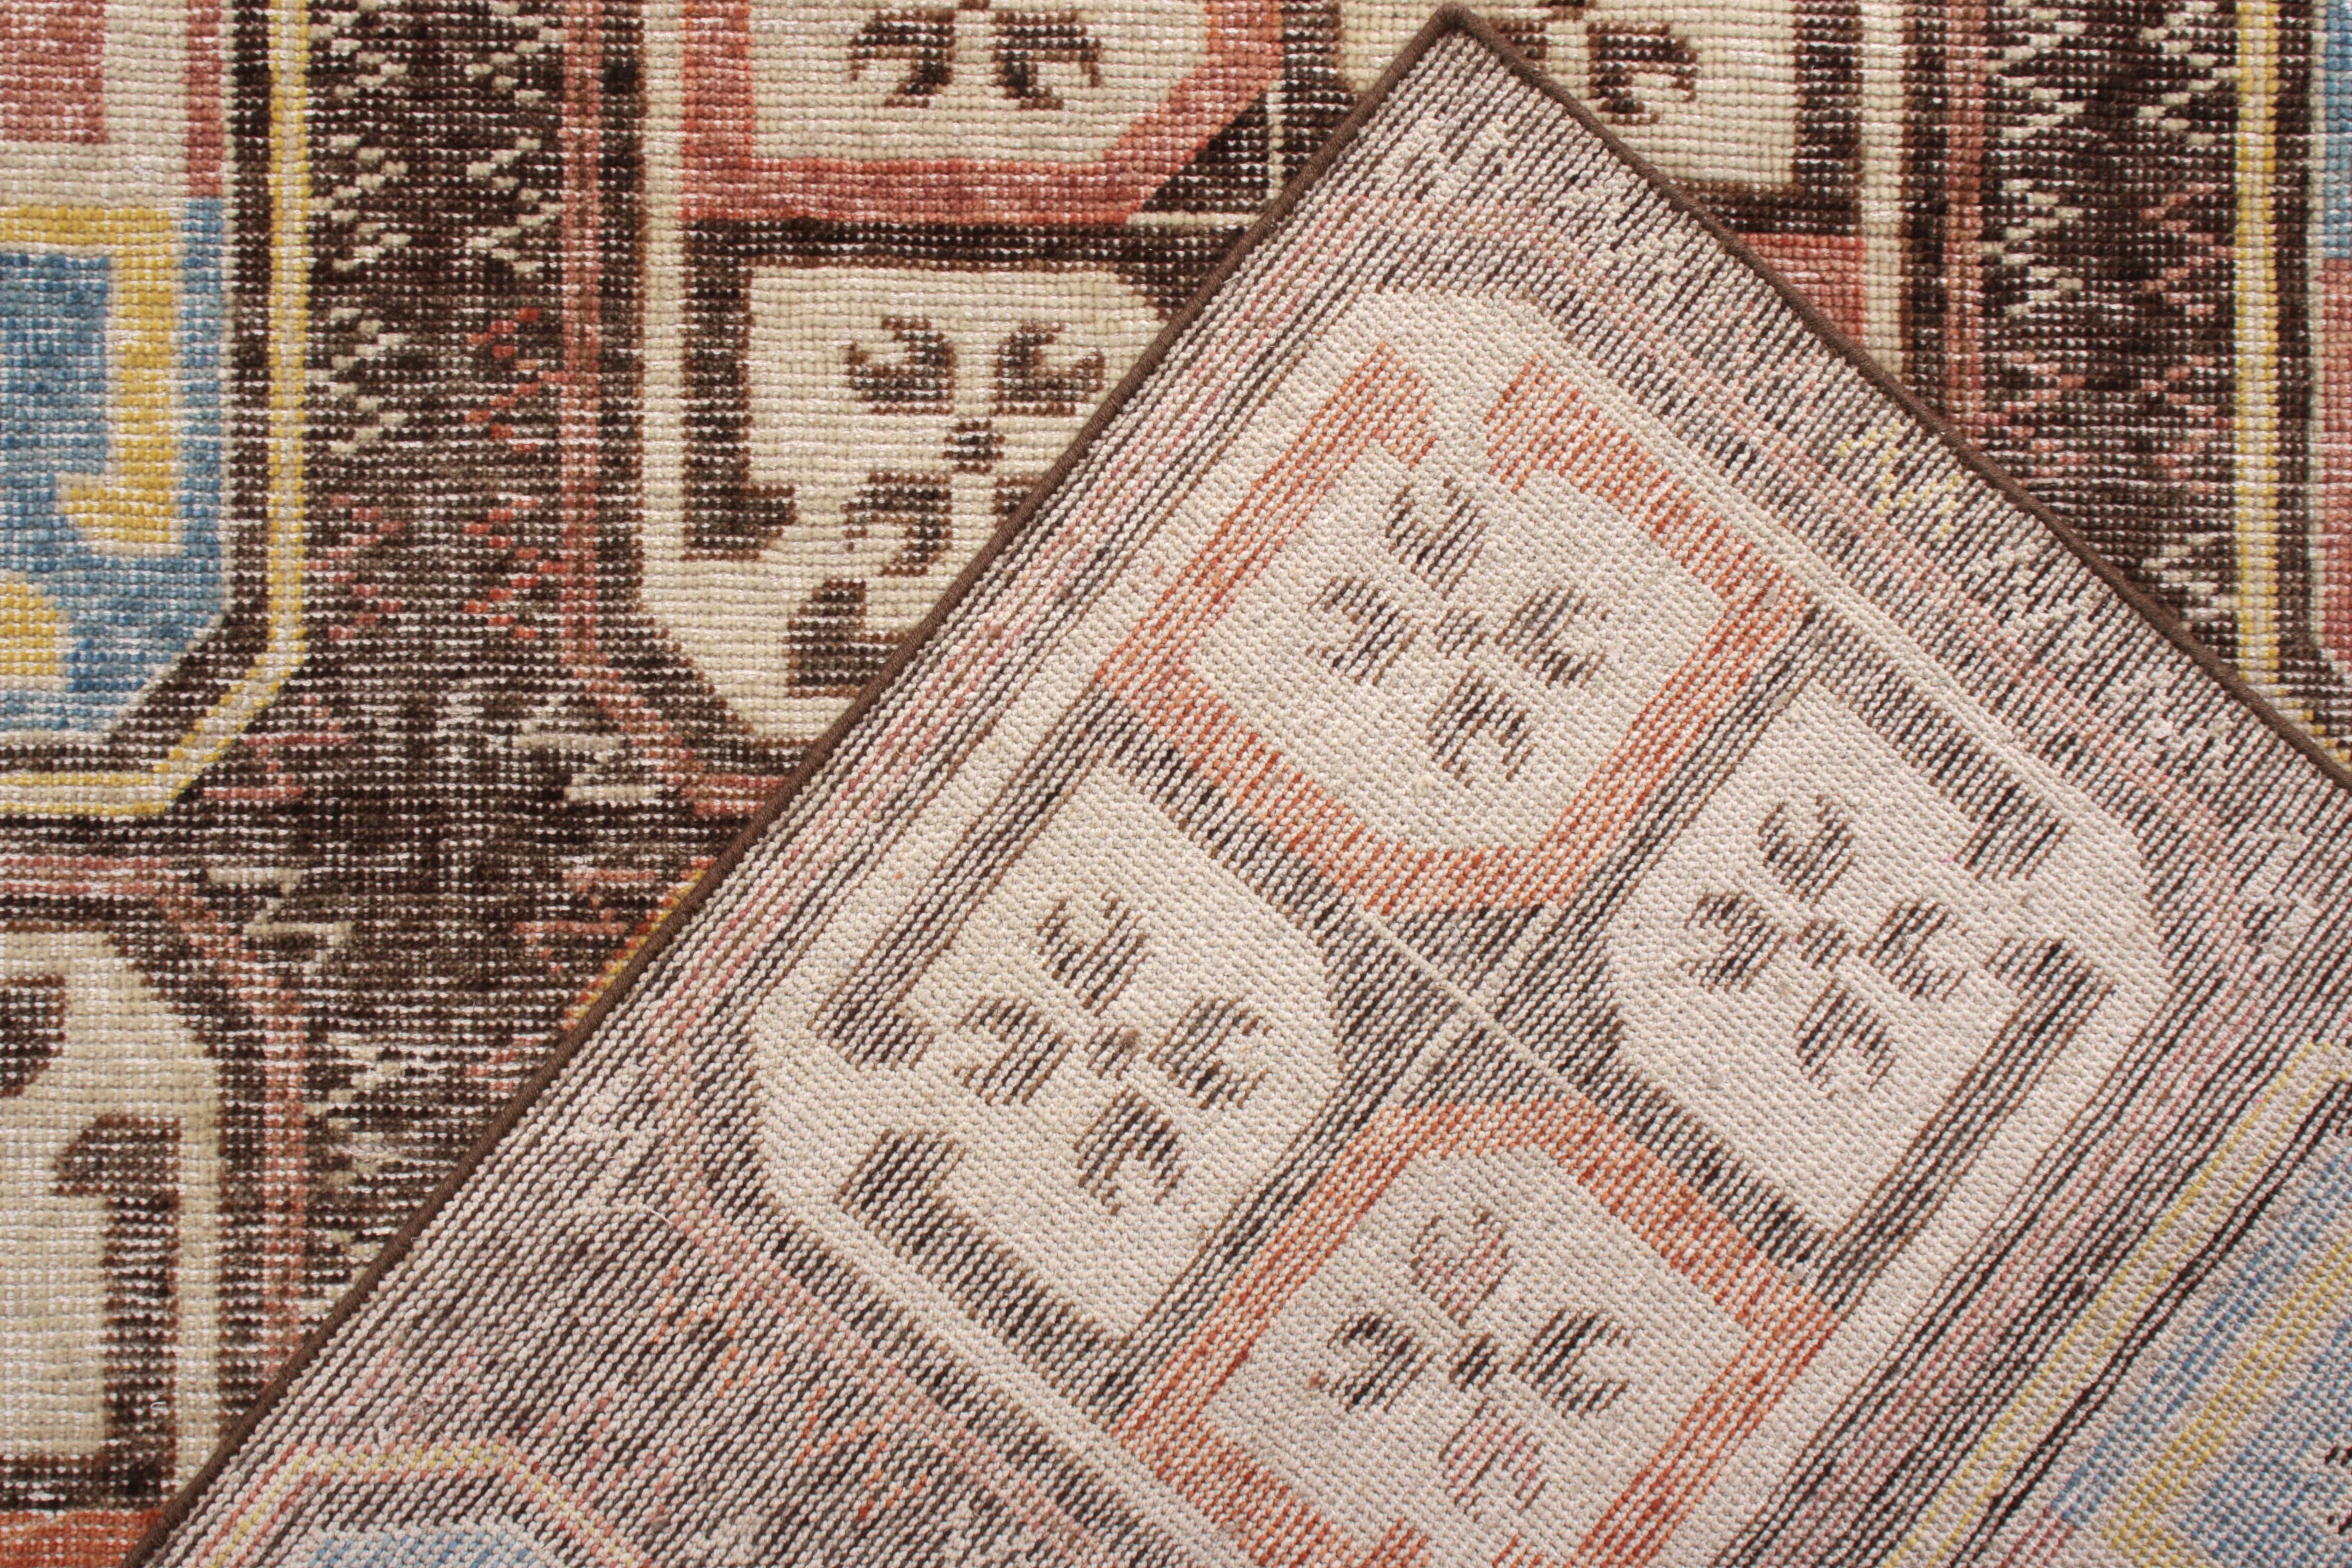 Hand-Knotted Rug & Kilim’s Bokhara Style Distressed Rug in Beige Grown Geometric Pattern For Sale